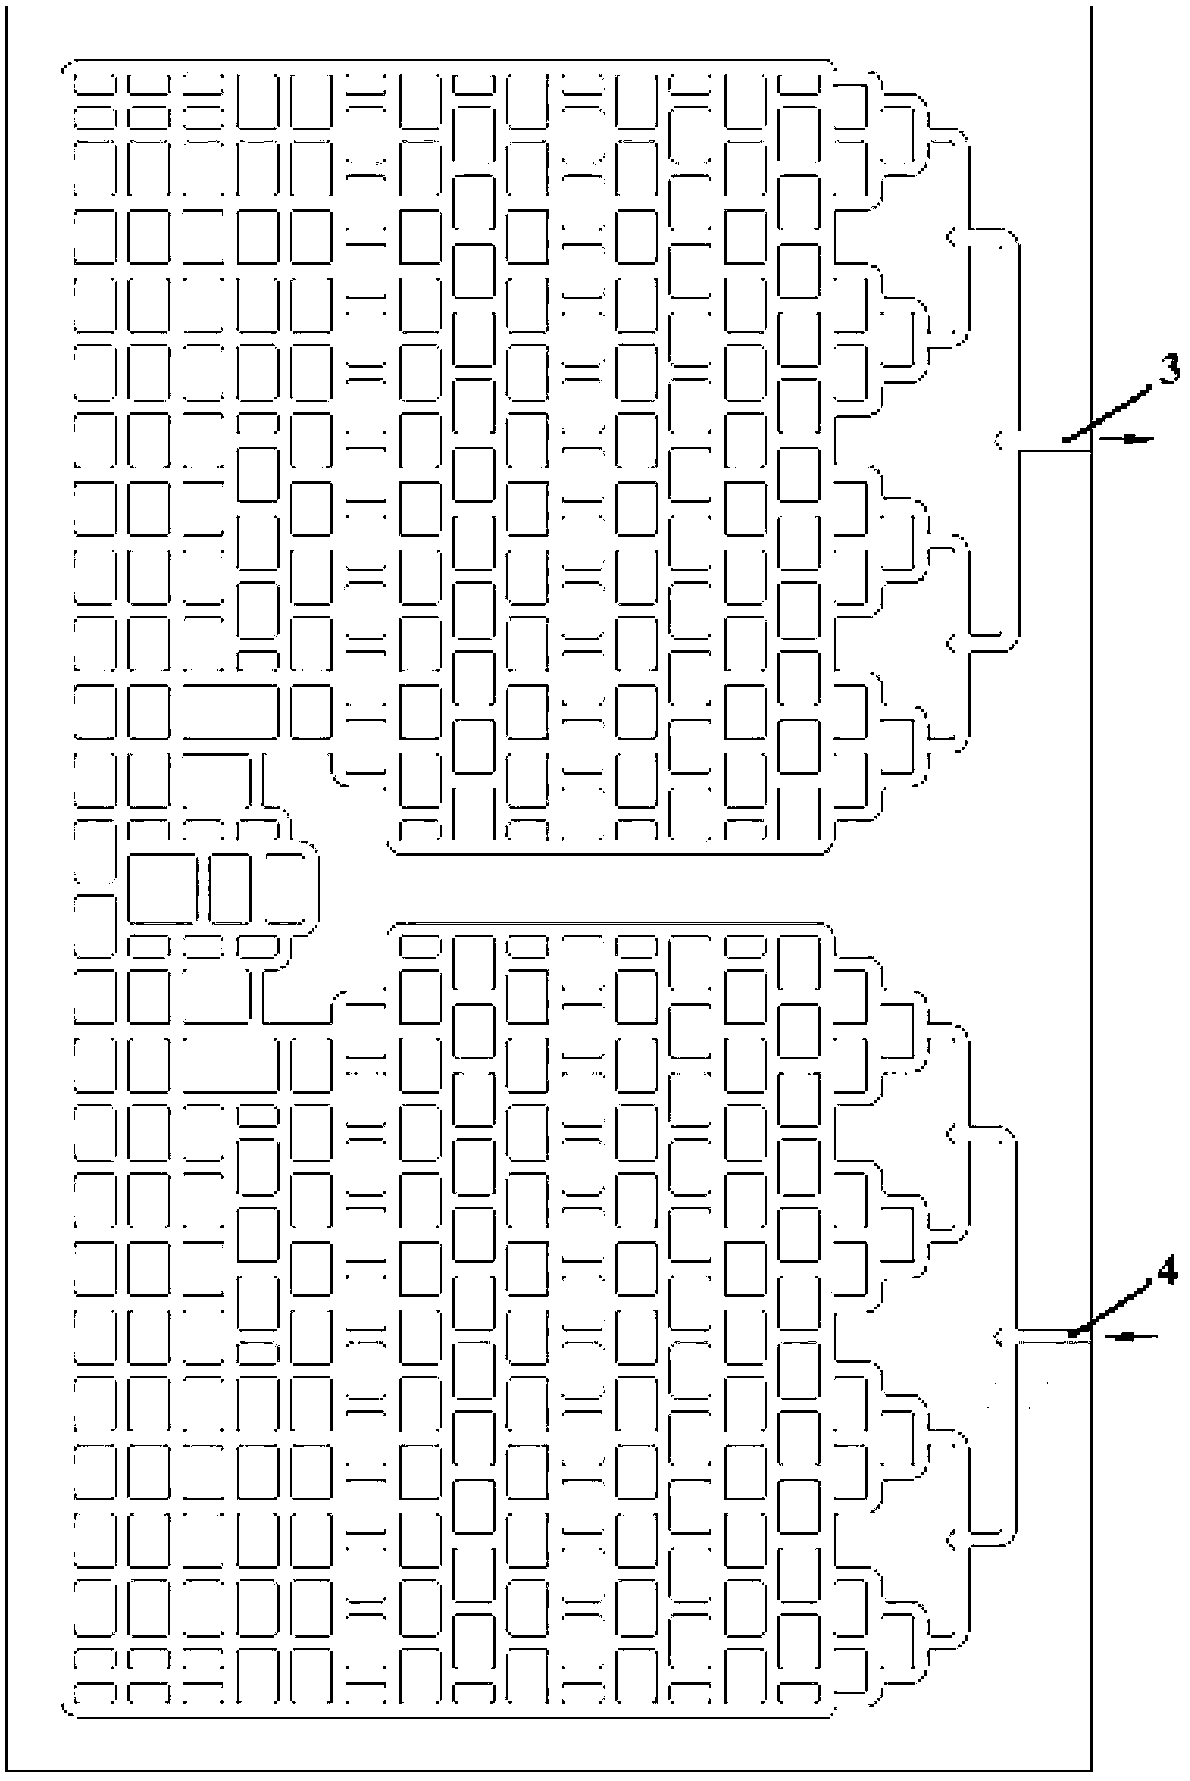 Inflation-type compound-channel evaporator for solar direct-expansion heat pump water heater